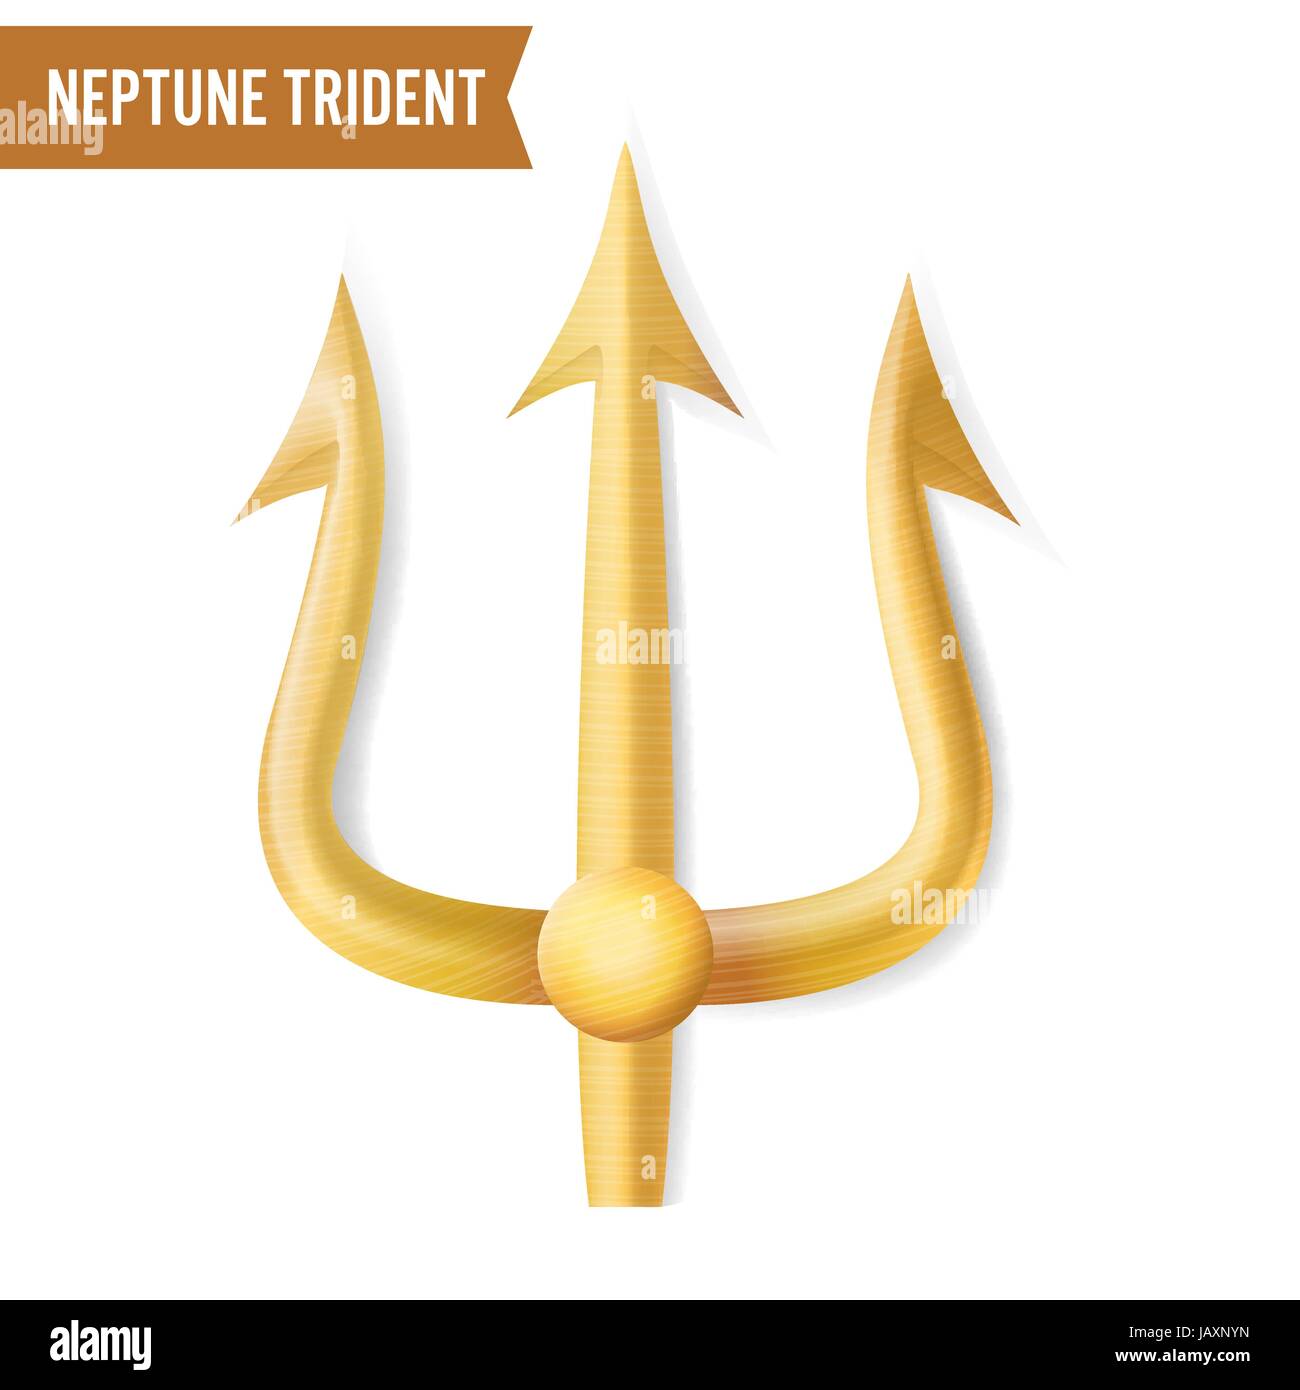 Neptune Trident Vector. Gold Realistic 3D Silhouette Of Neptune Or Poseidon Weapon. Pitchfork Sharp Fork Object. Isolated On White Stock Vector